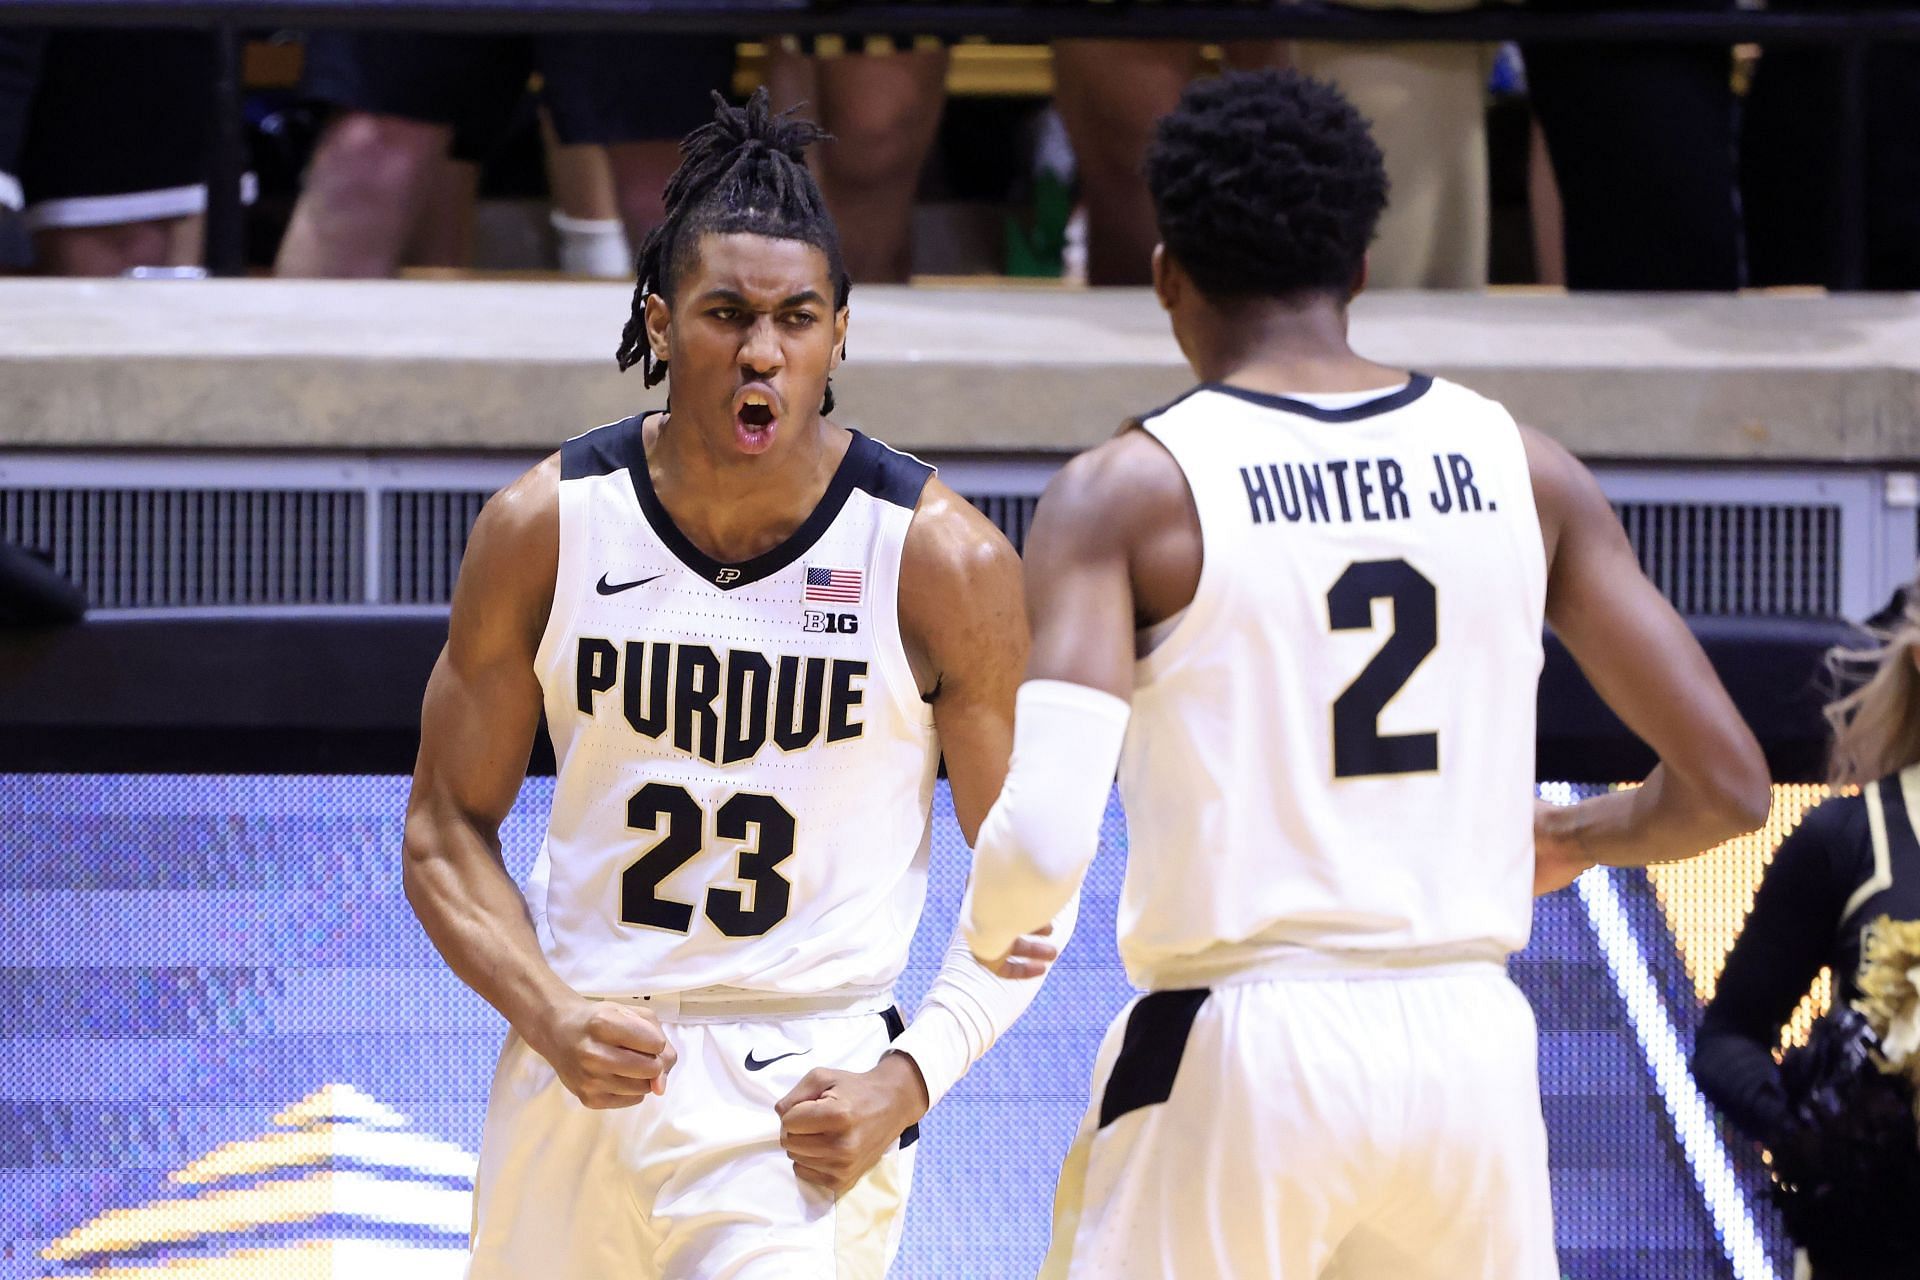 Purdue guard Jaden Ivey continues to impress in NCAA basketball.